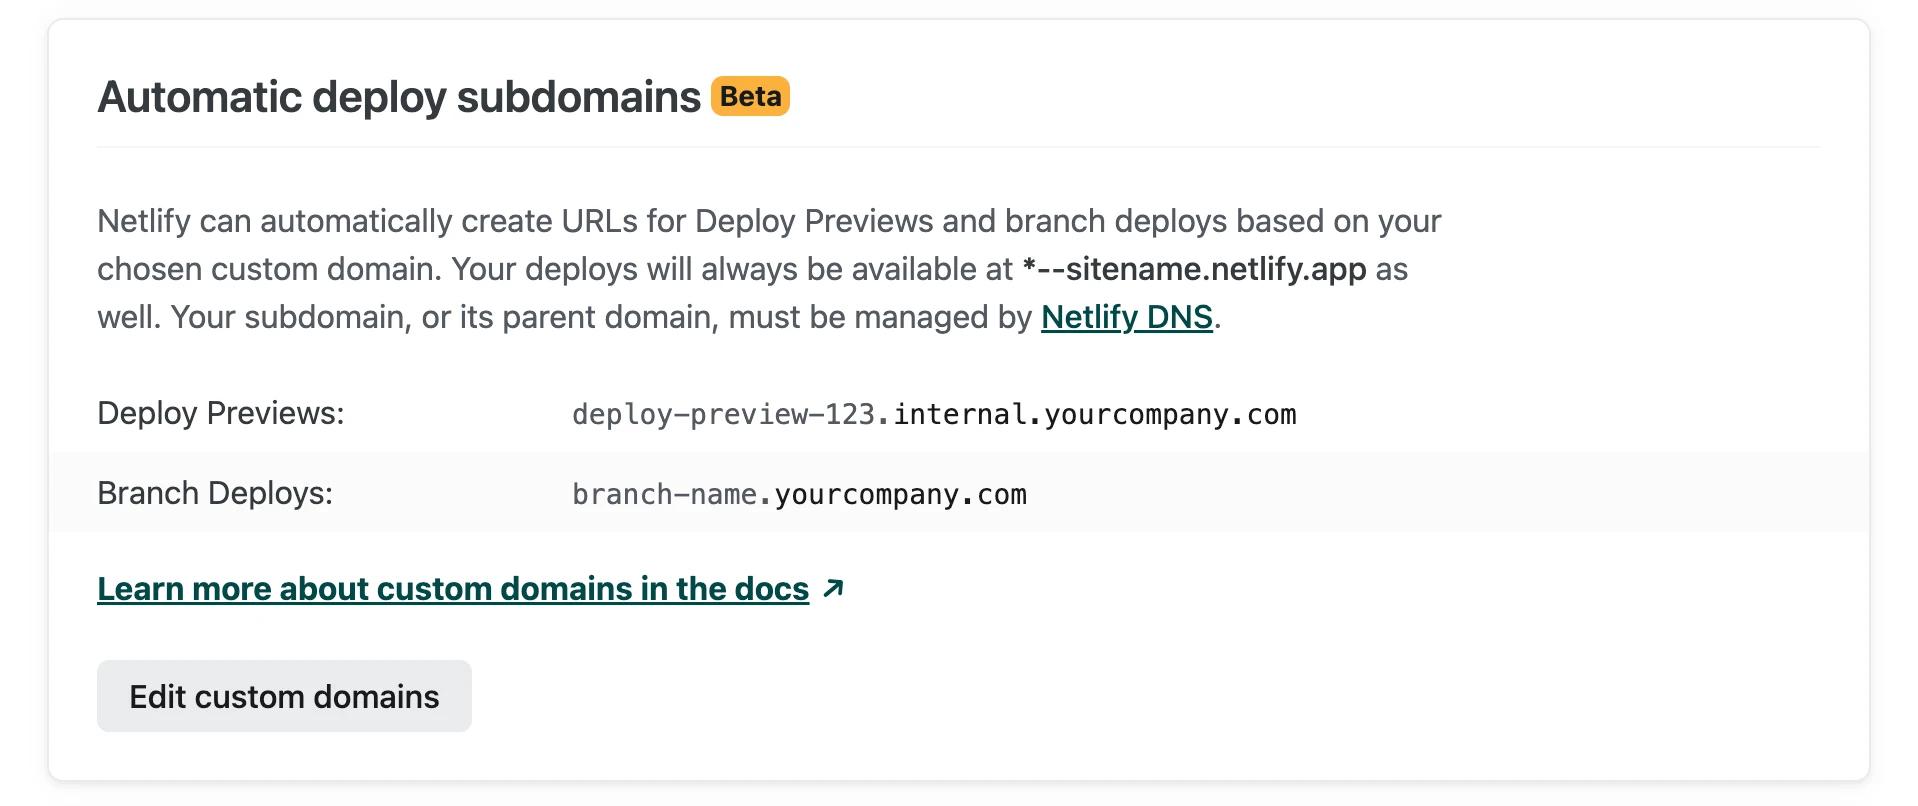 Deploy Previews and branch deploys are each set to use a custom subdomain